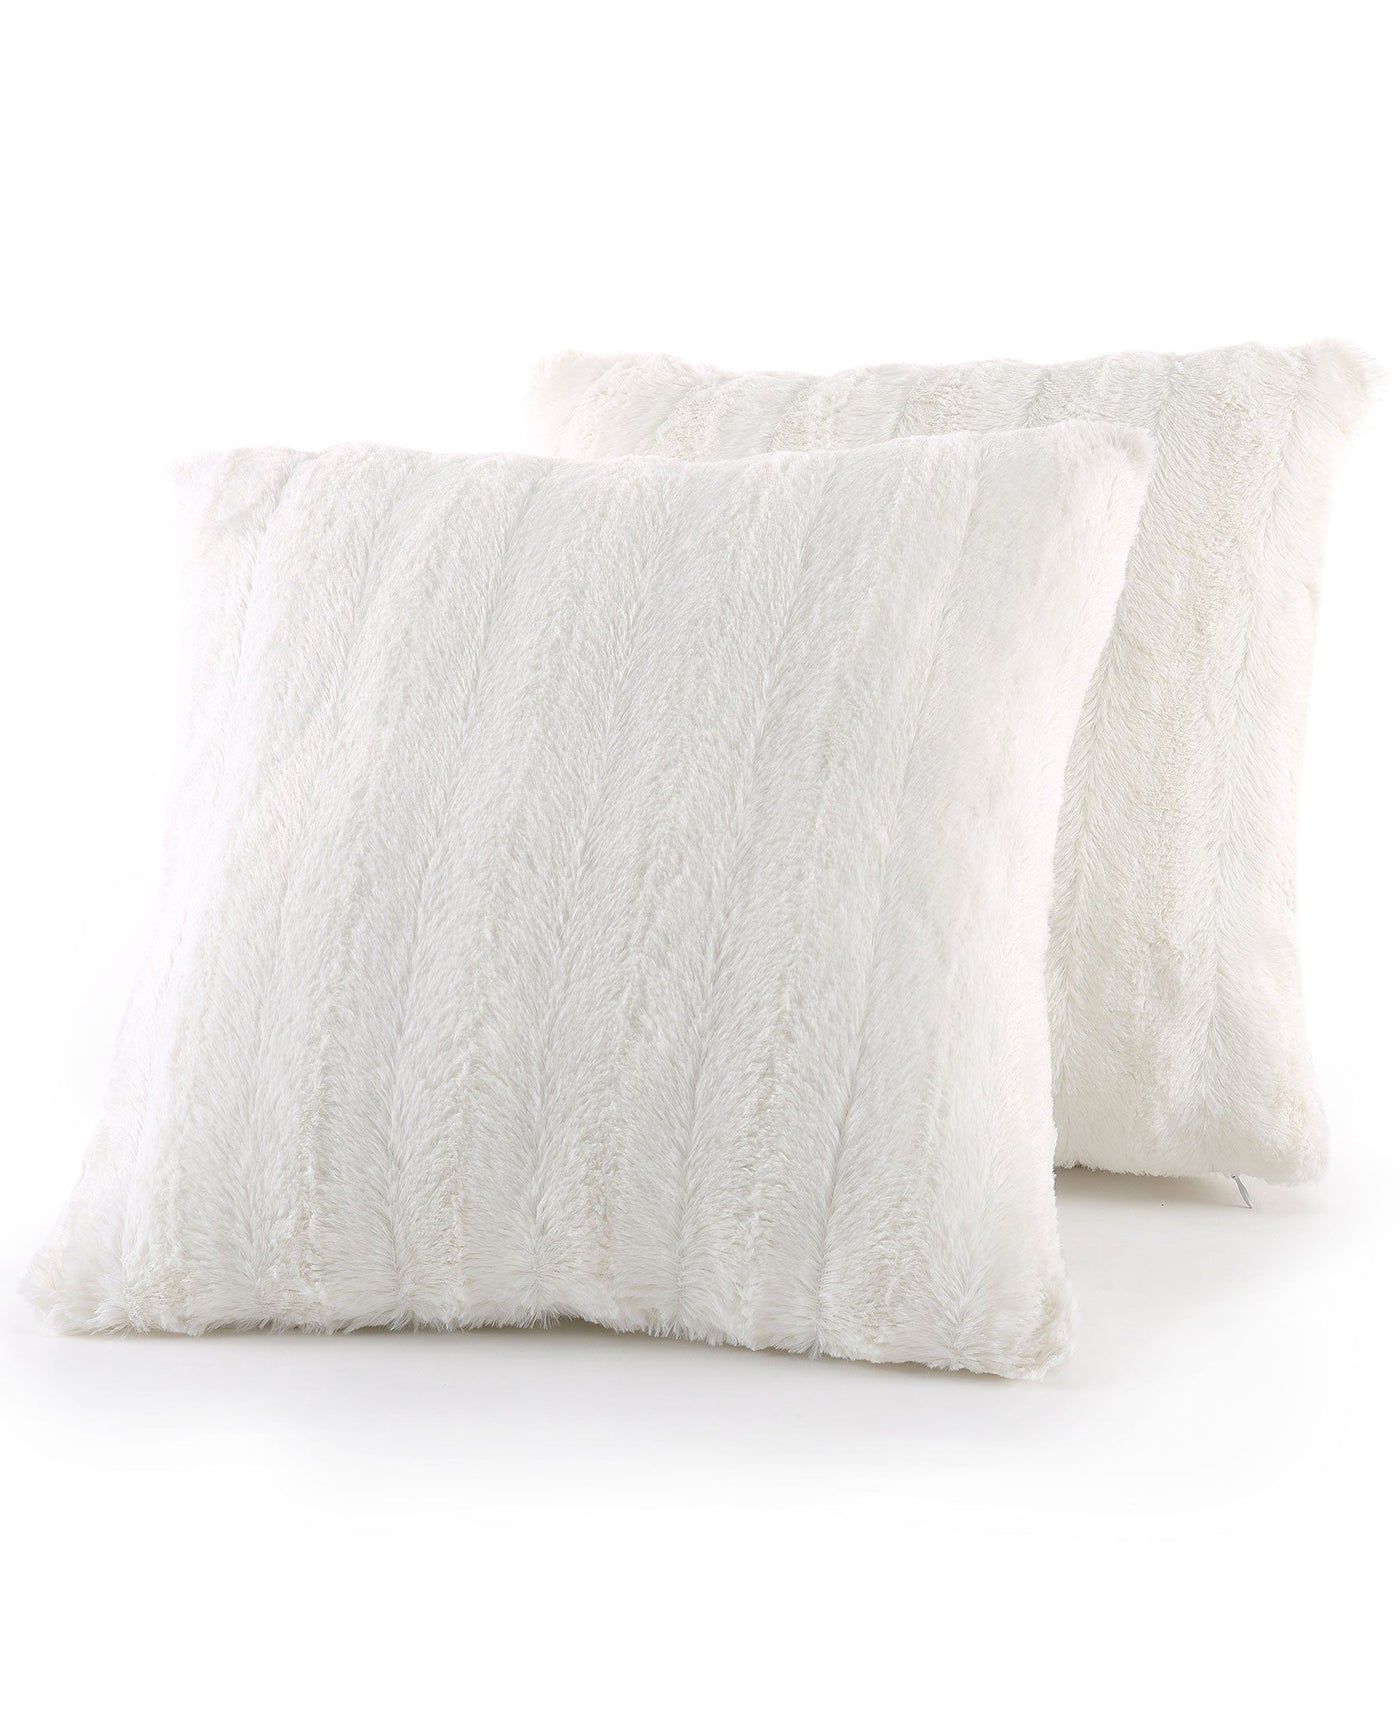 Cheer Collection Set of 2 Embossed Faux Fur Throw Pillows - Snow Leopard (24 x 24)